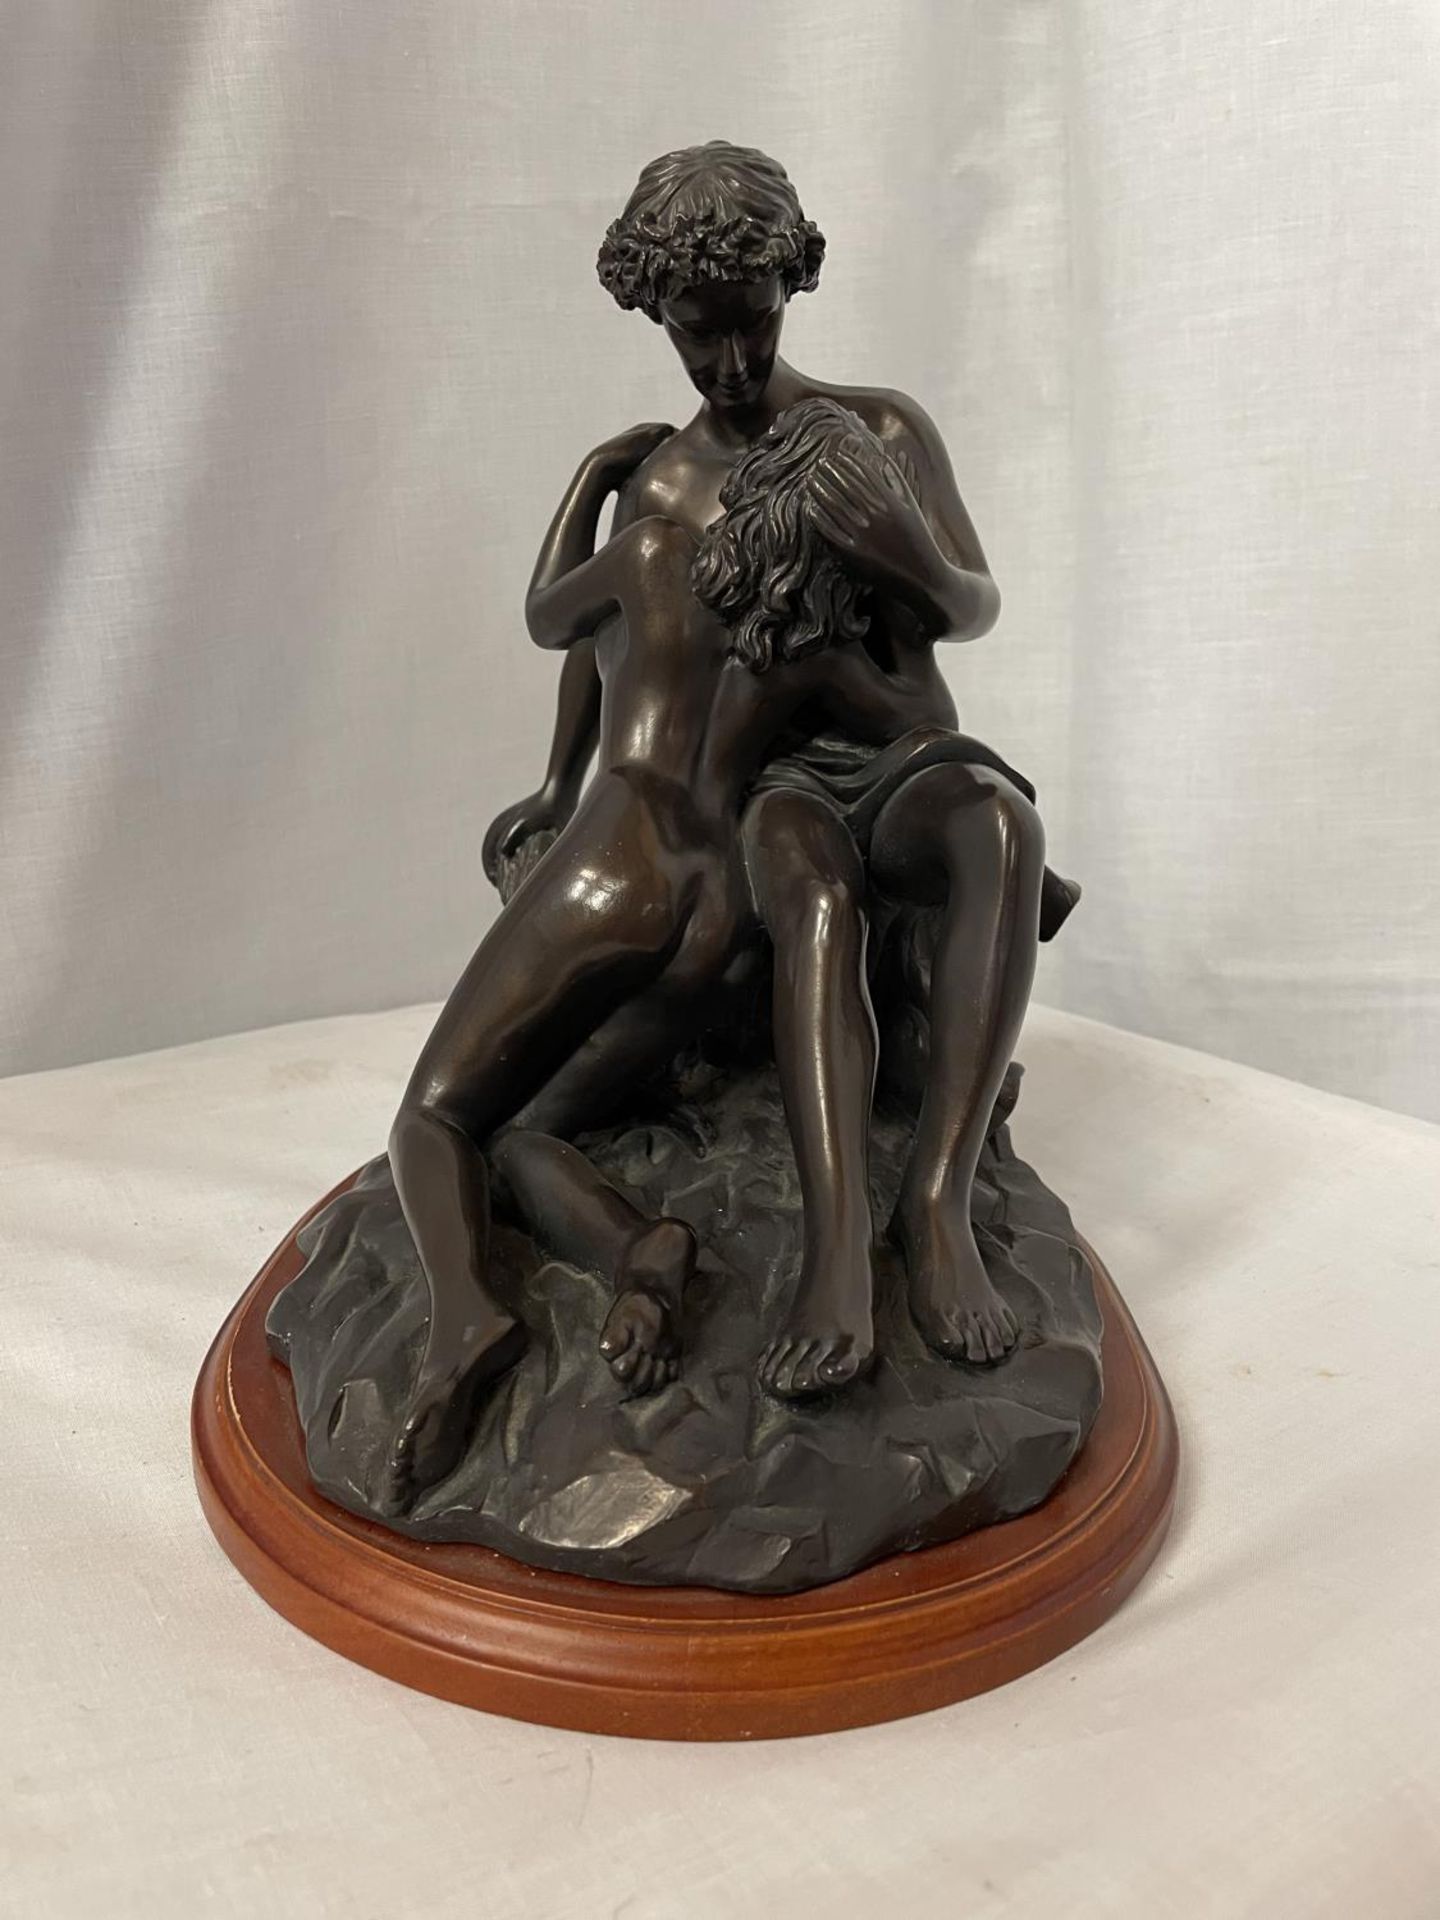 A BRONZE STYLE ORNAMENT OF AN EMBRACING COUPLE ON WOODEN STAND, HEIGHT 27CM - Image 2 of 4